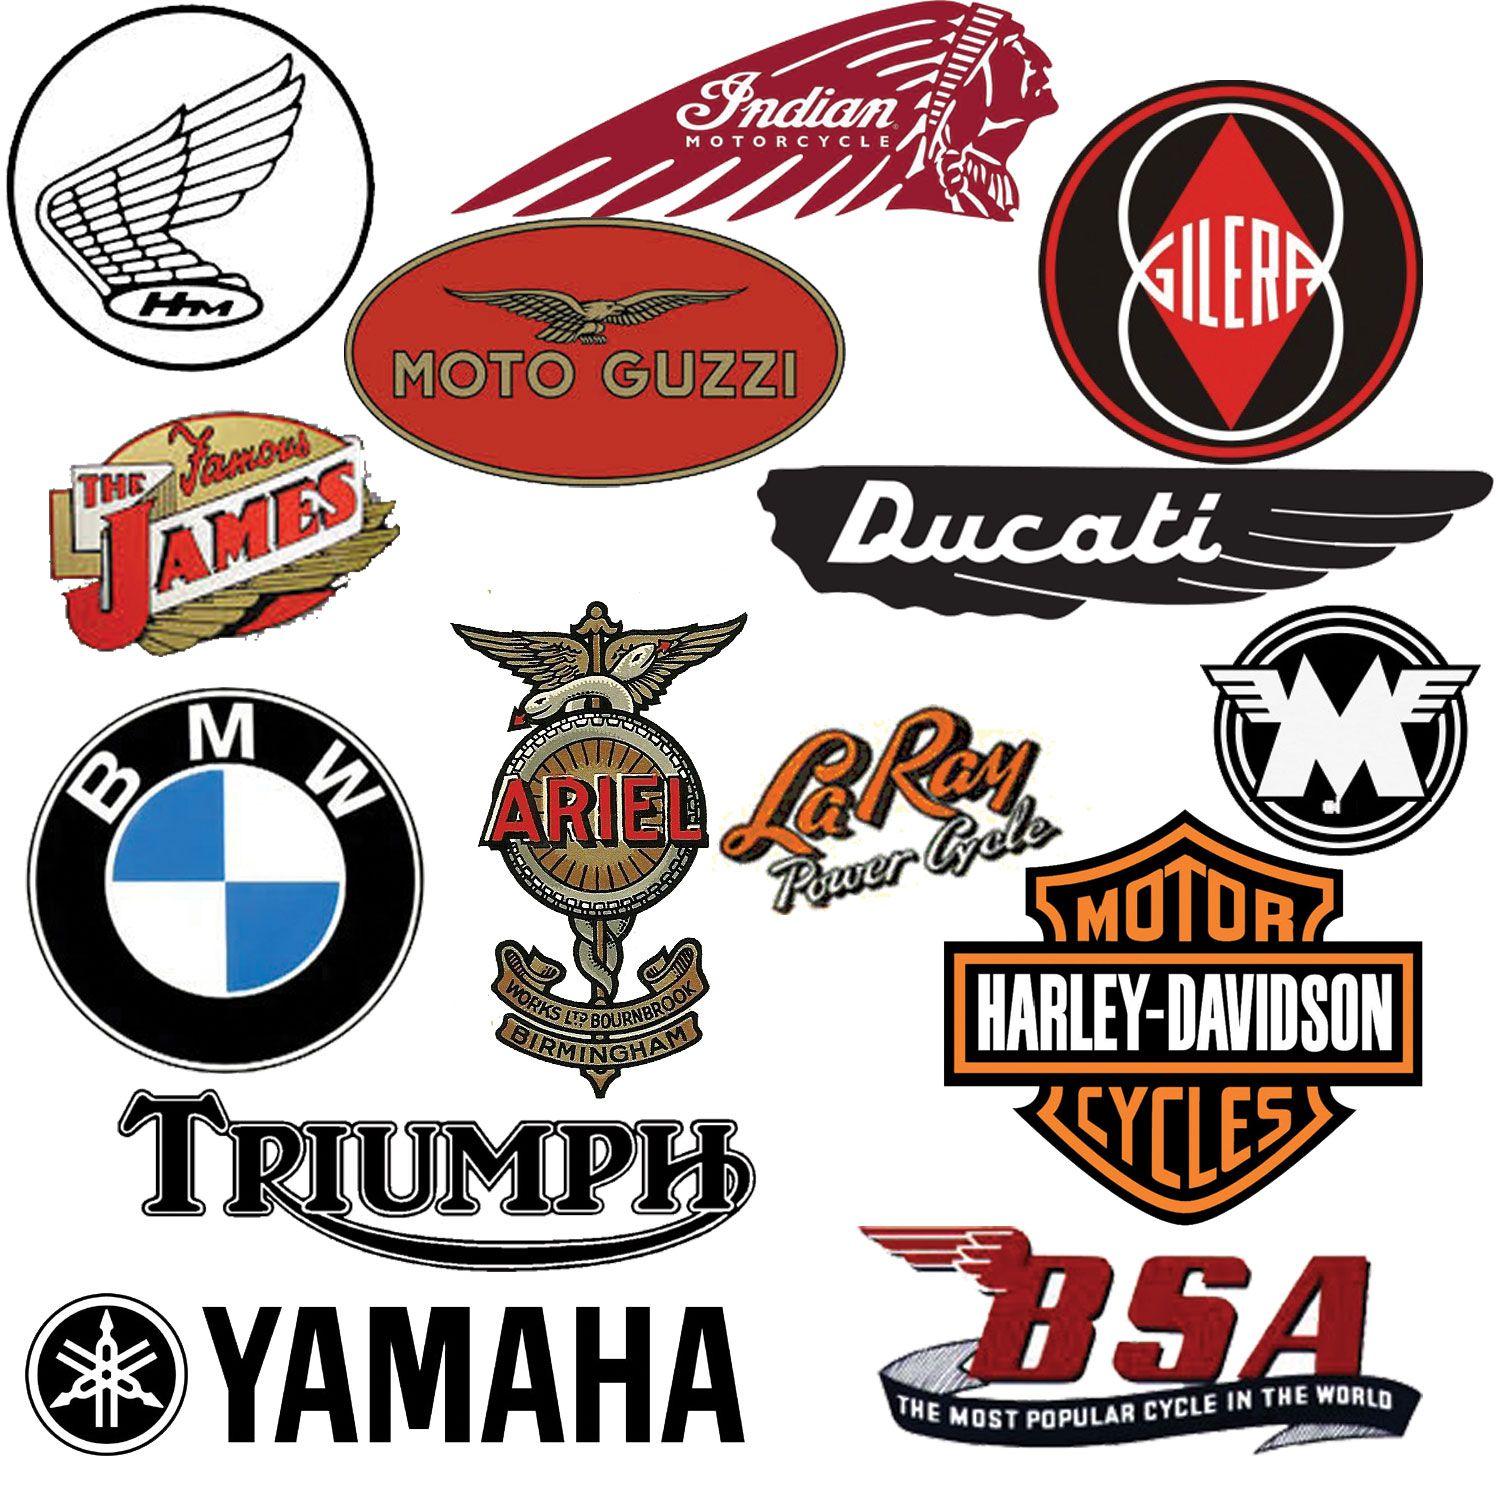 Classic Motorcycle Logo - RelicMoto Vintage Motorcycle Show: August 2015